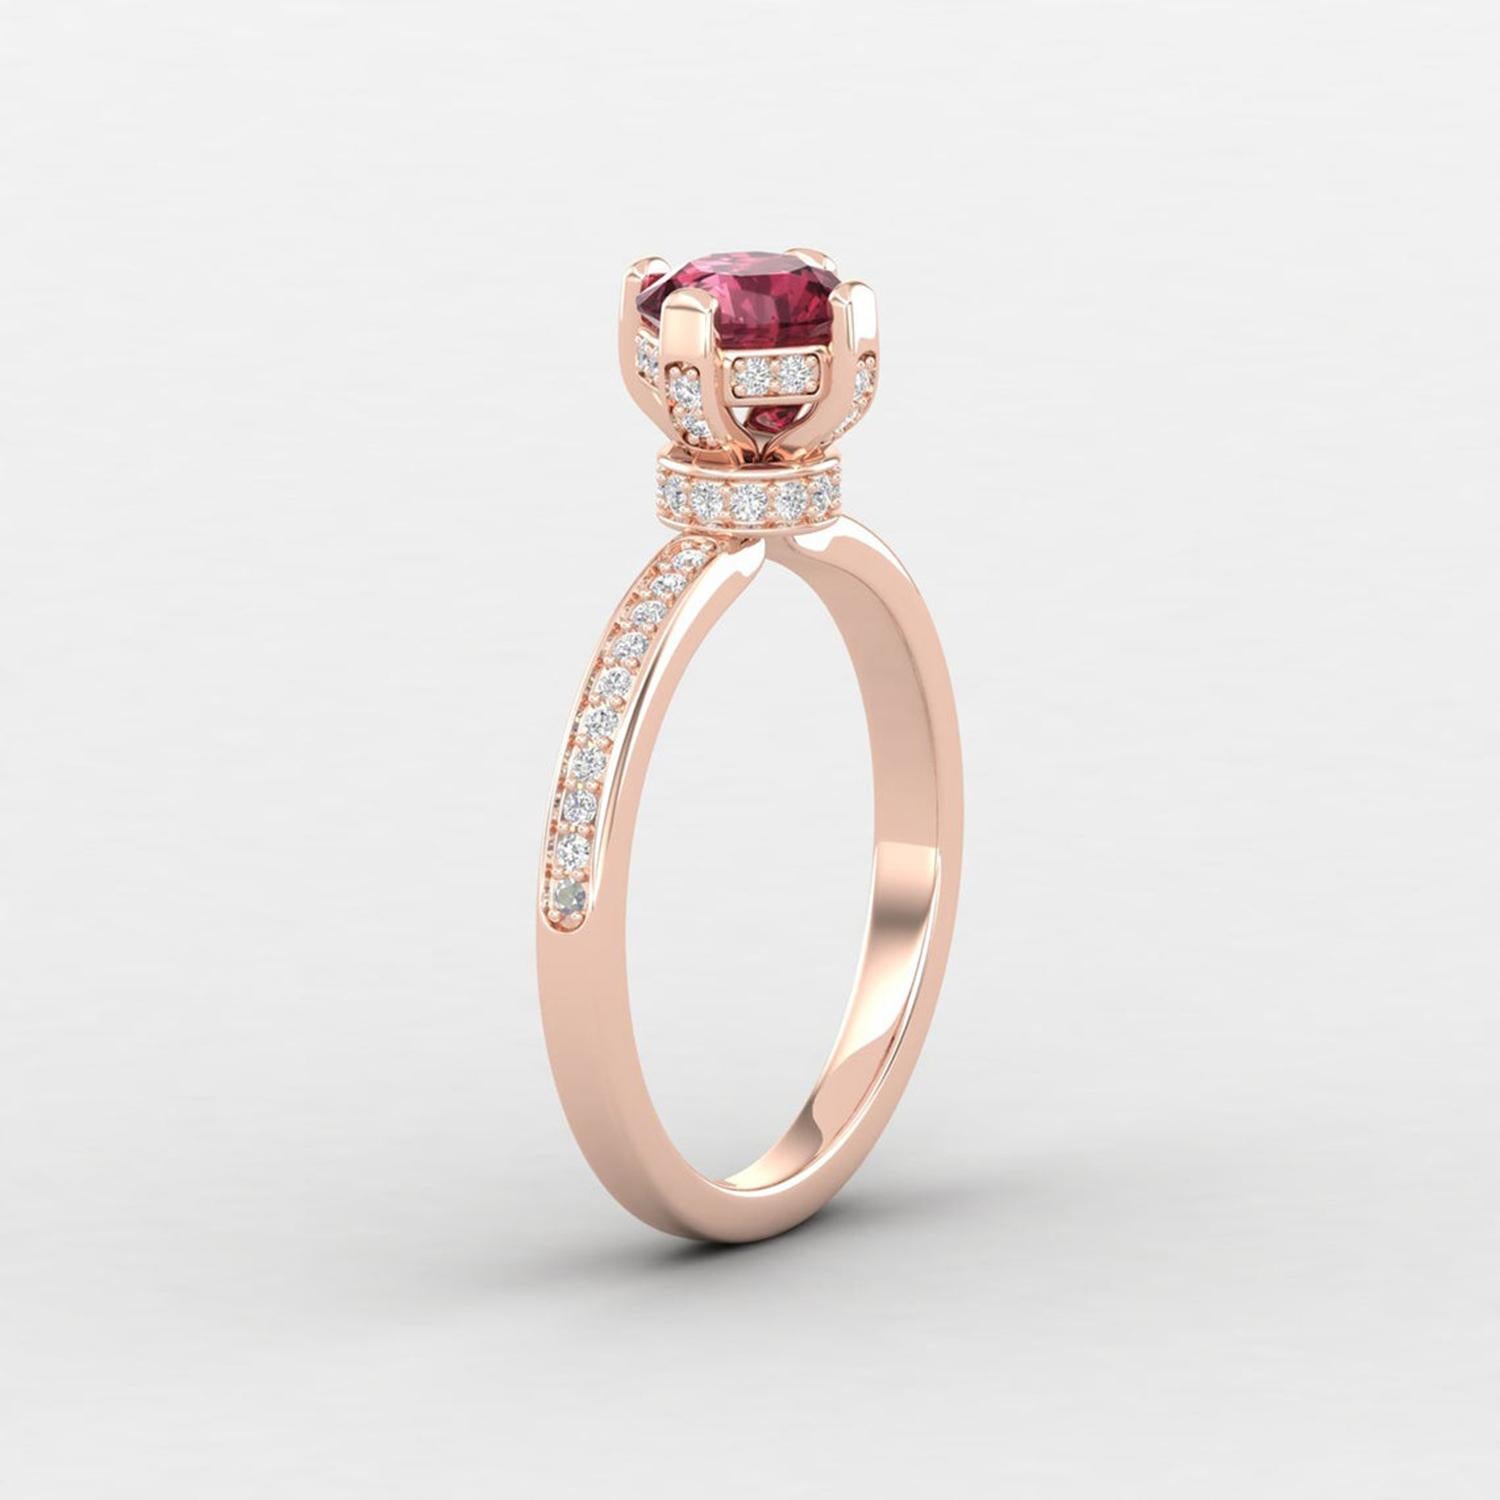 Round Cut 14 Karat Gold Red Garnet Ring / Diamond Solitaire Ring / Engagement Ring for Her For Sale